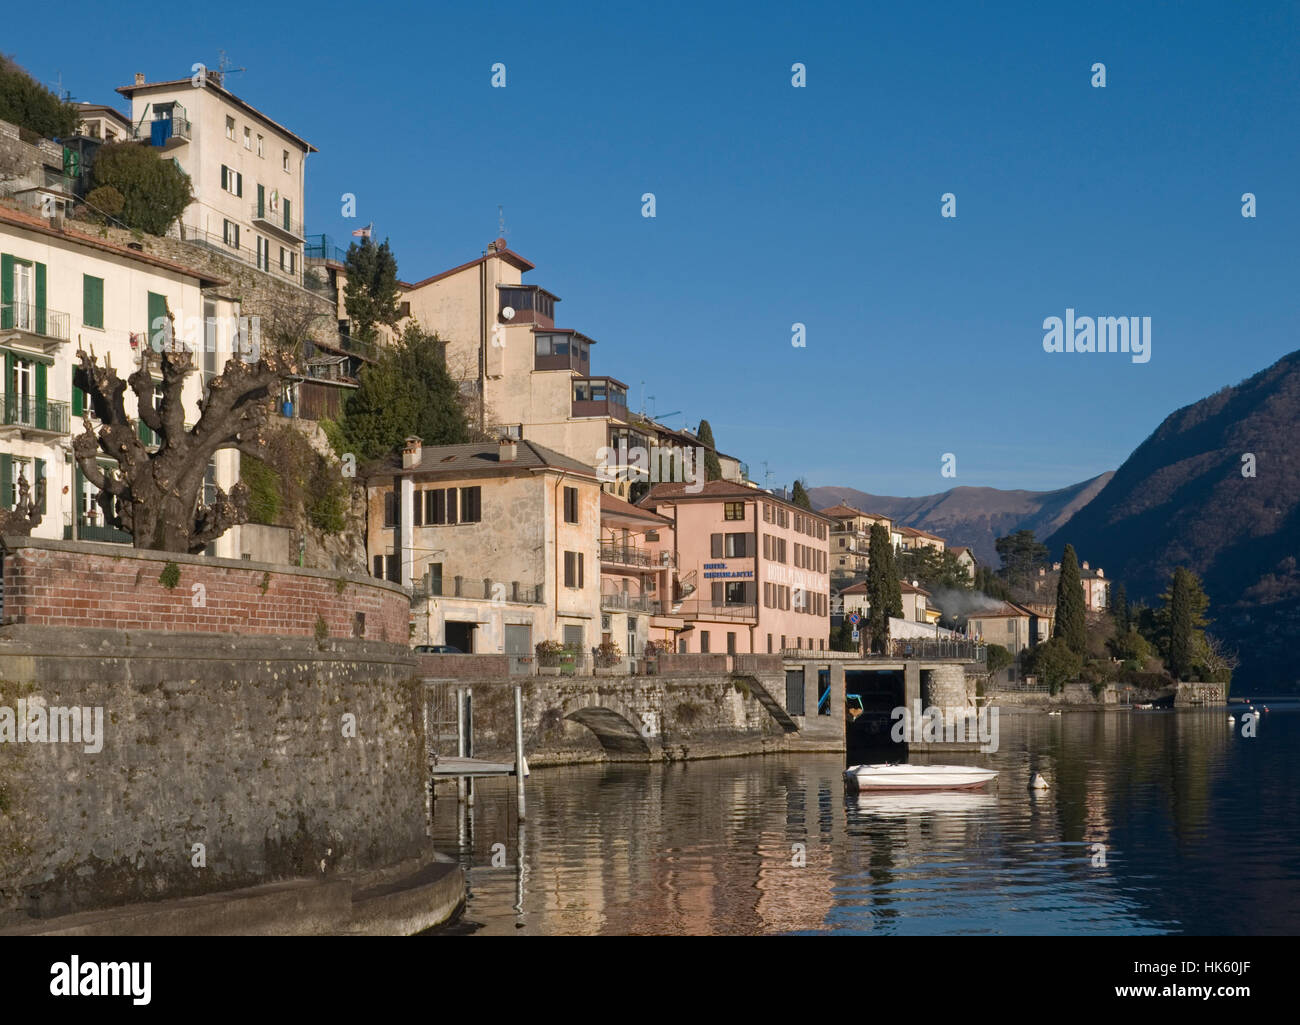 picturesque, landscape, scenery, countryside, nature, italy, beautiful, Stock Photo